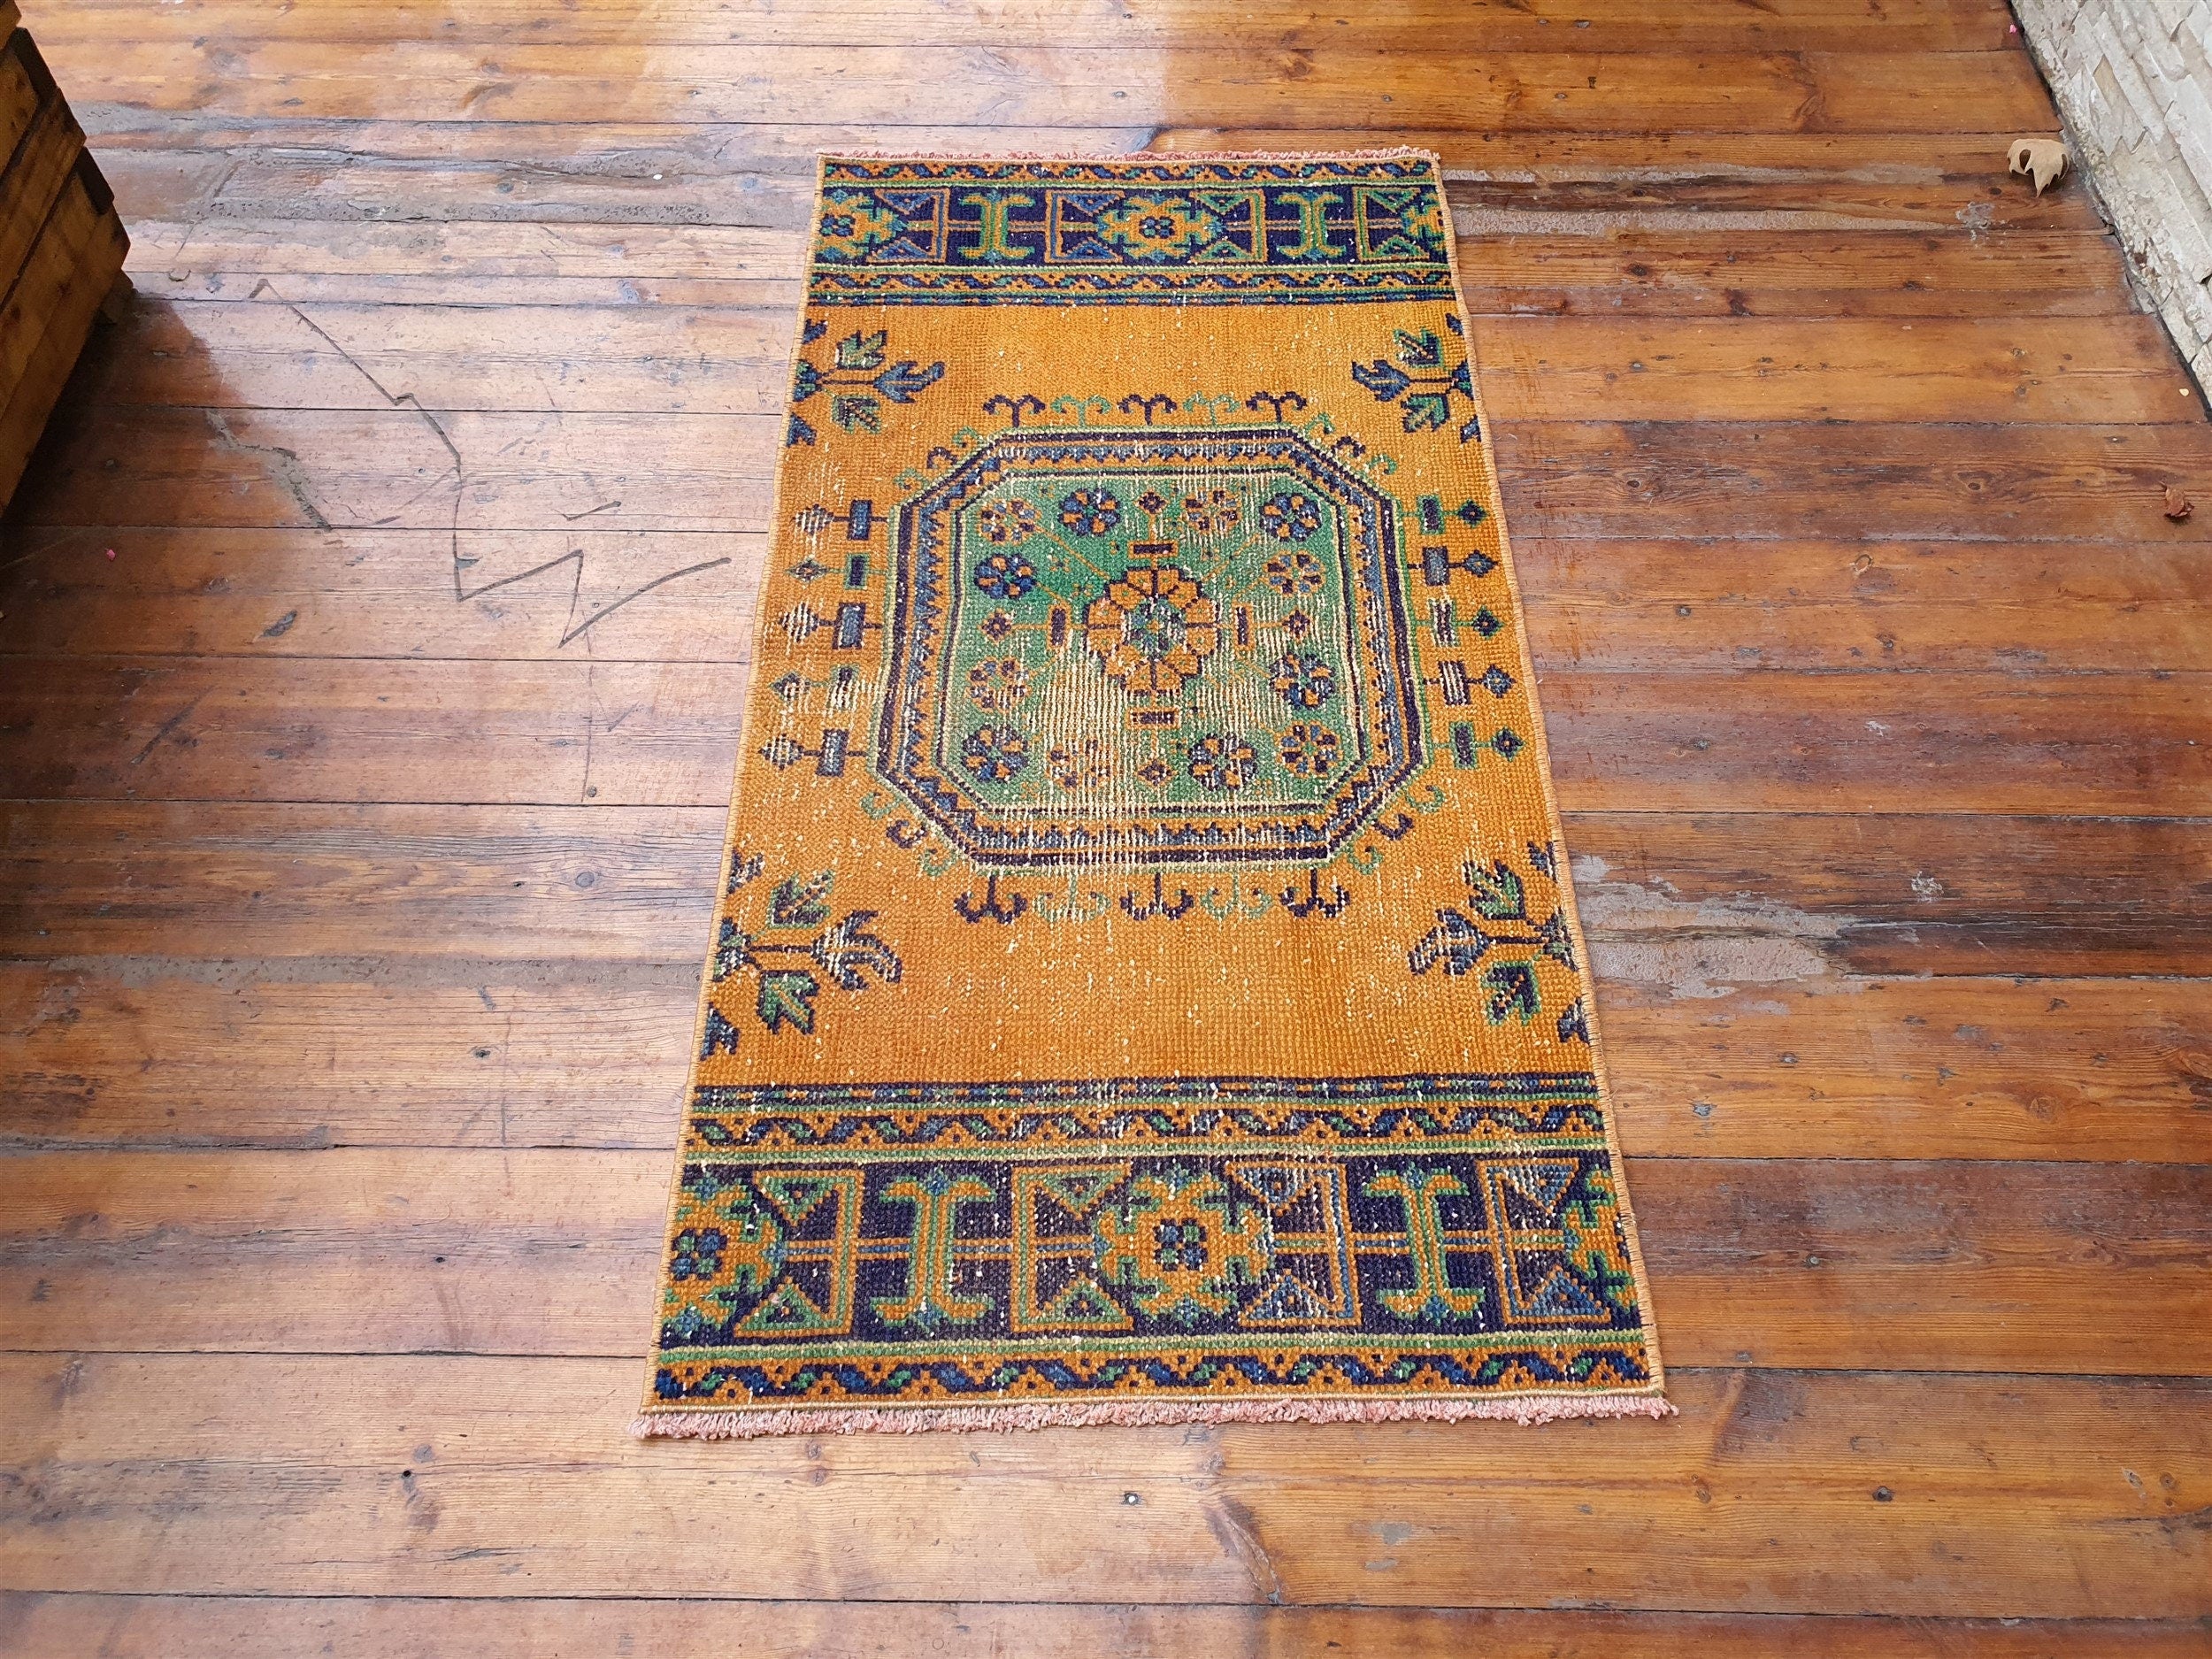 Small Turkish Rug, 4 ft 1 in x 2 ft 1 in, Apricot Orange and Teal Green Vintage Faded Distressed Door Mat